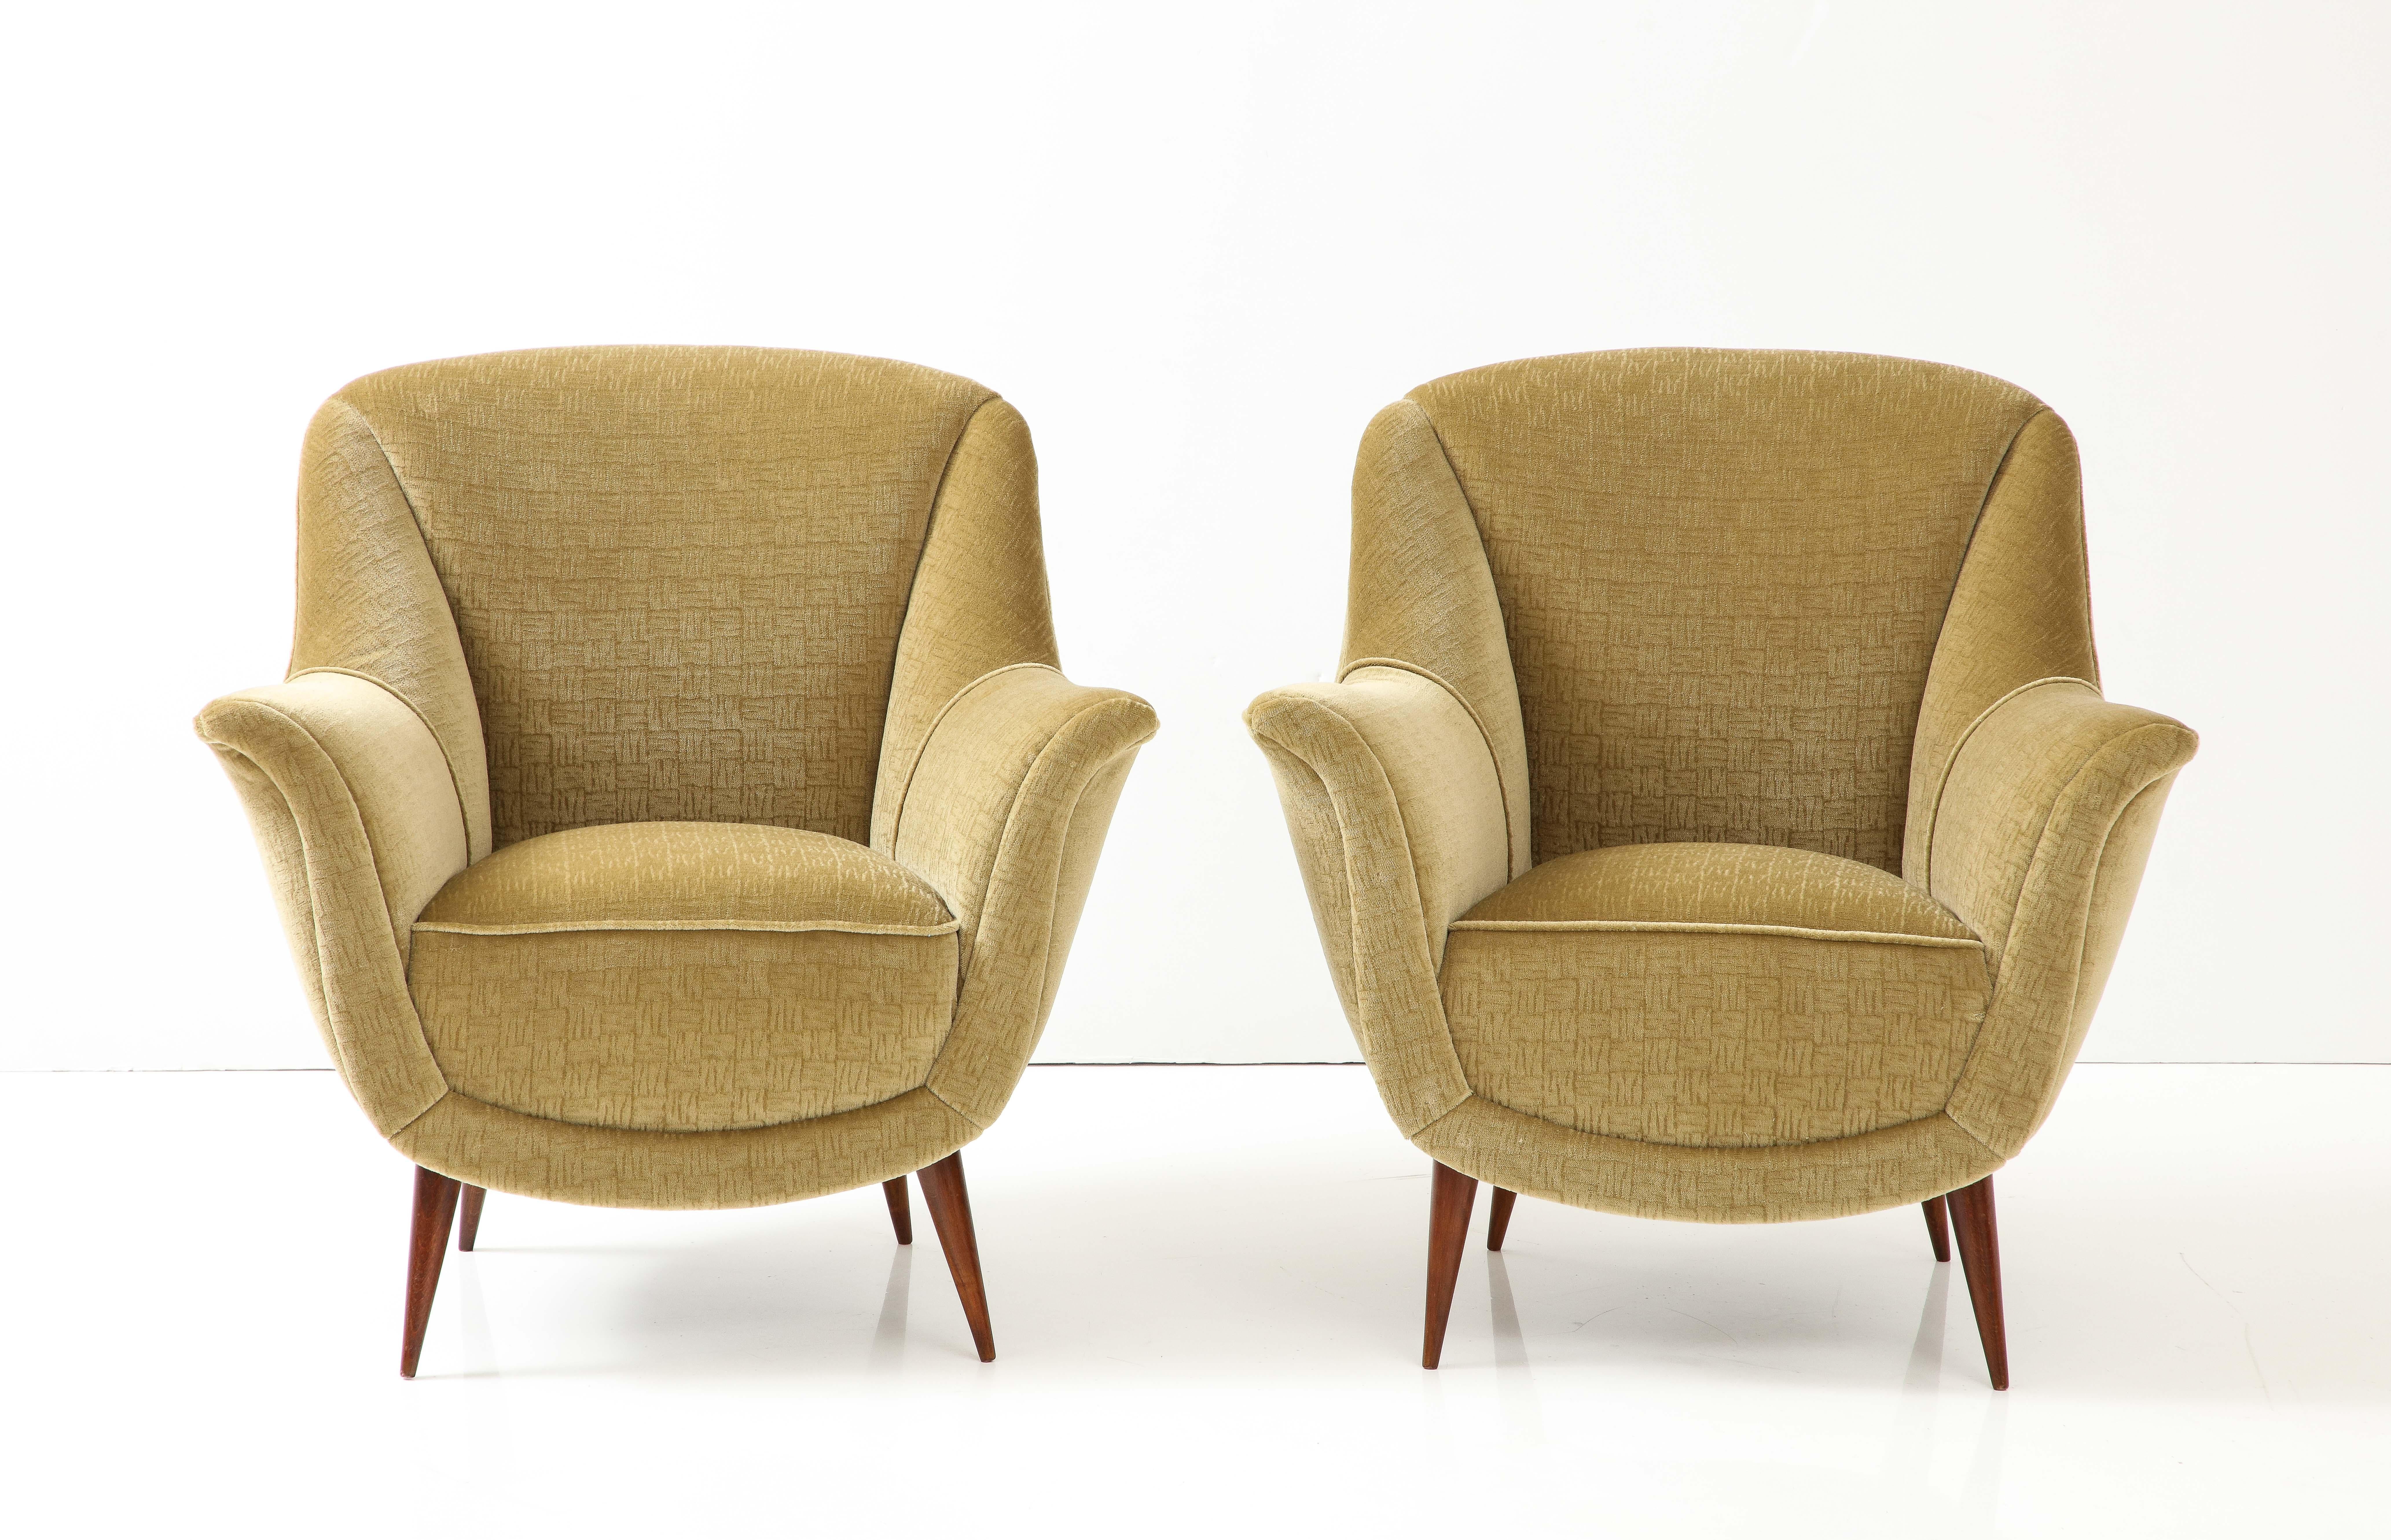 1950's Modernist Gio Ponti Style Italian Lounge Chairs In Mohair Upholstery For Sale 5